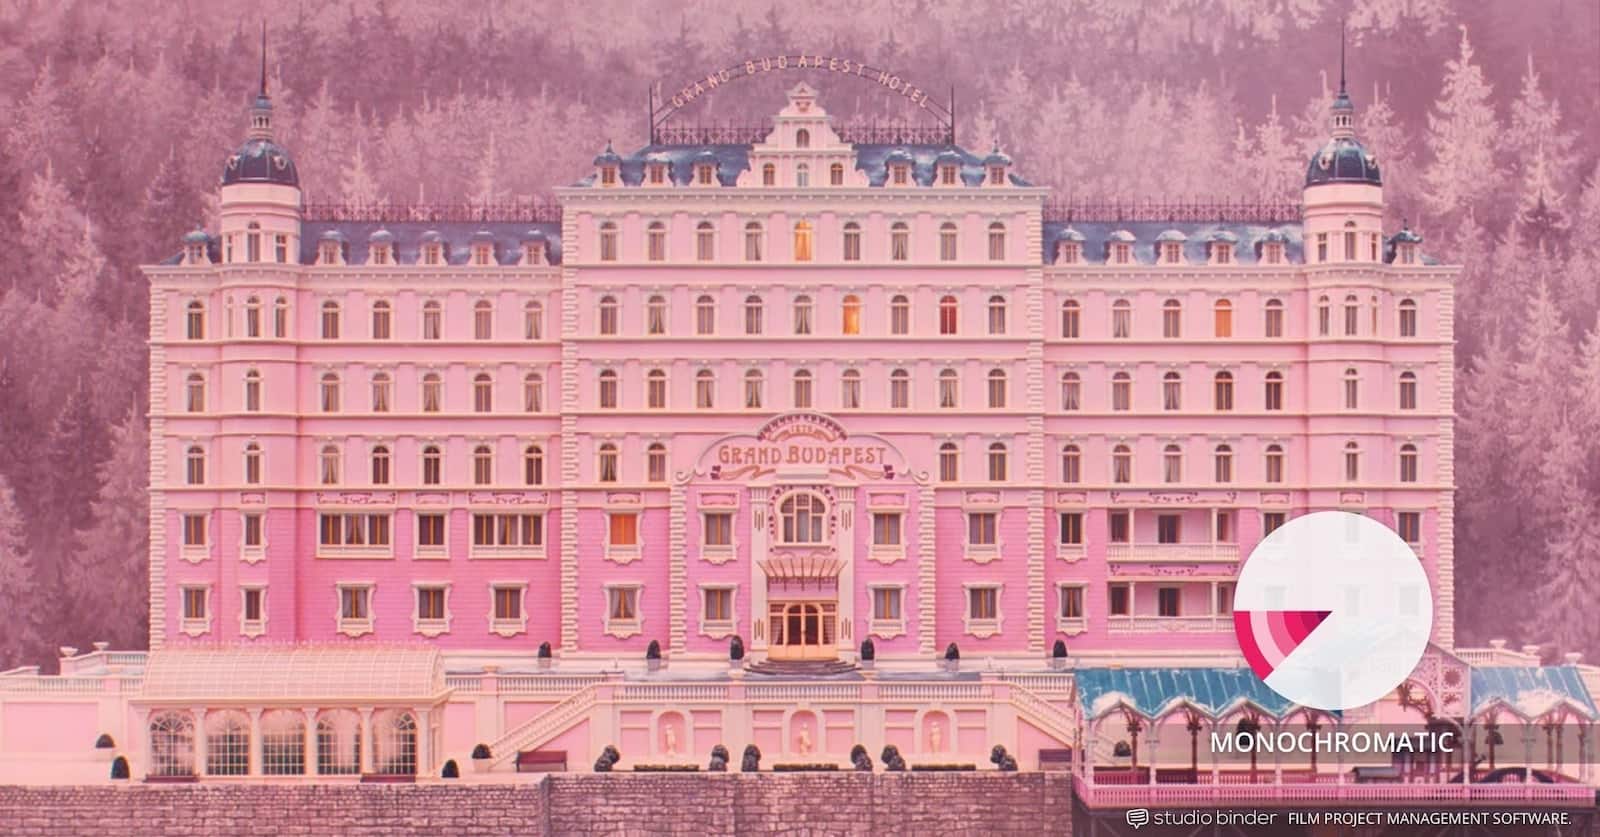 How to Use Color in Film Example - Movie Color Palette - Types of Color Schemes - Monochromatic Color Scheme - Grand Budapest Hotel